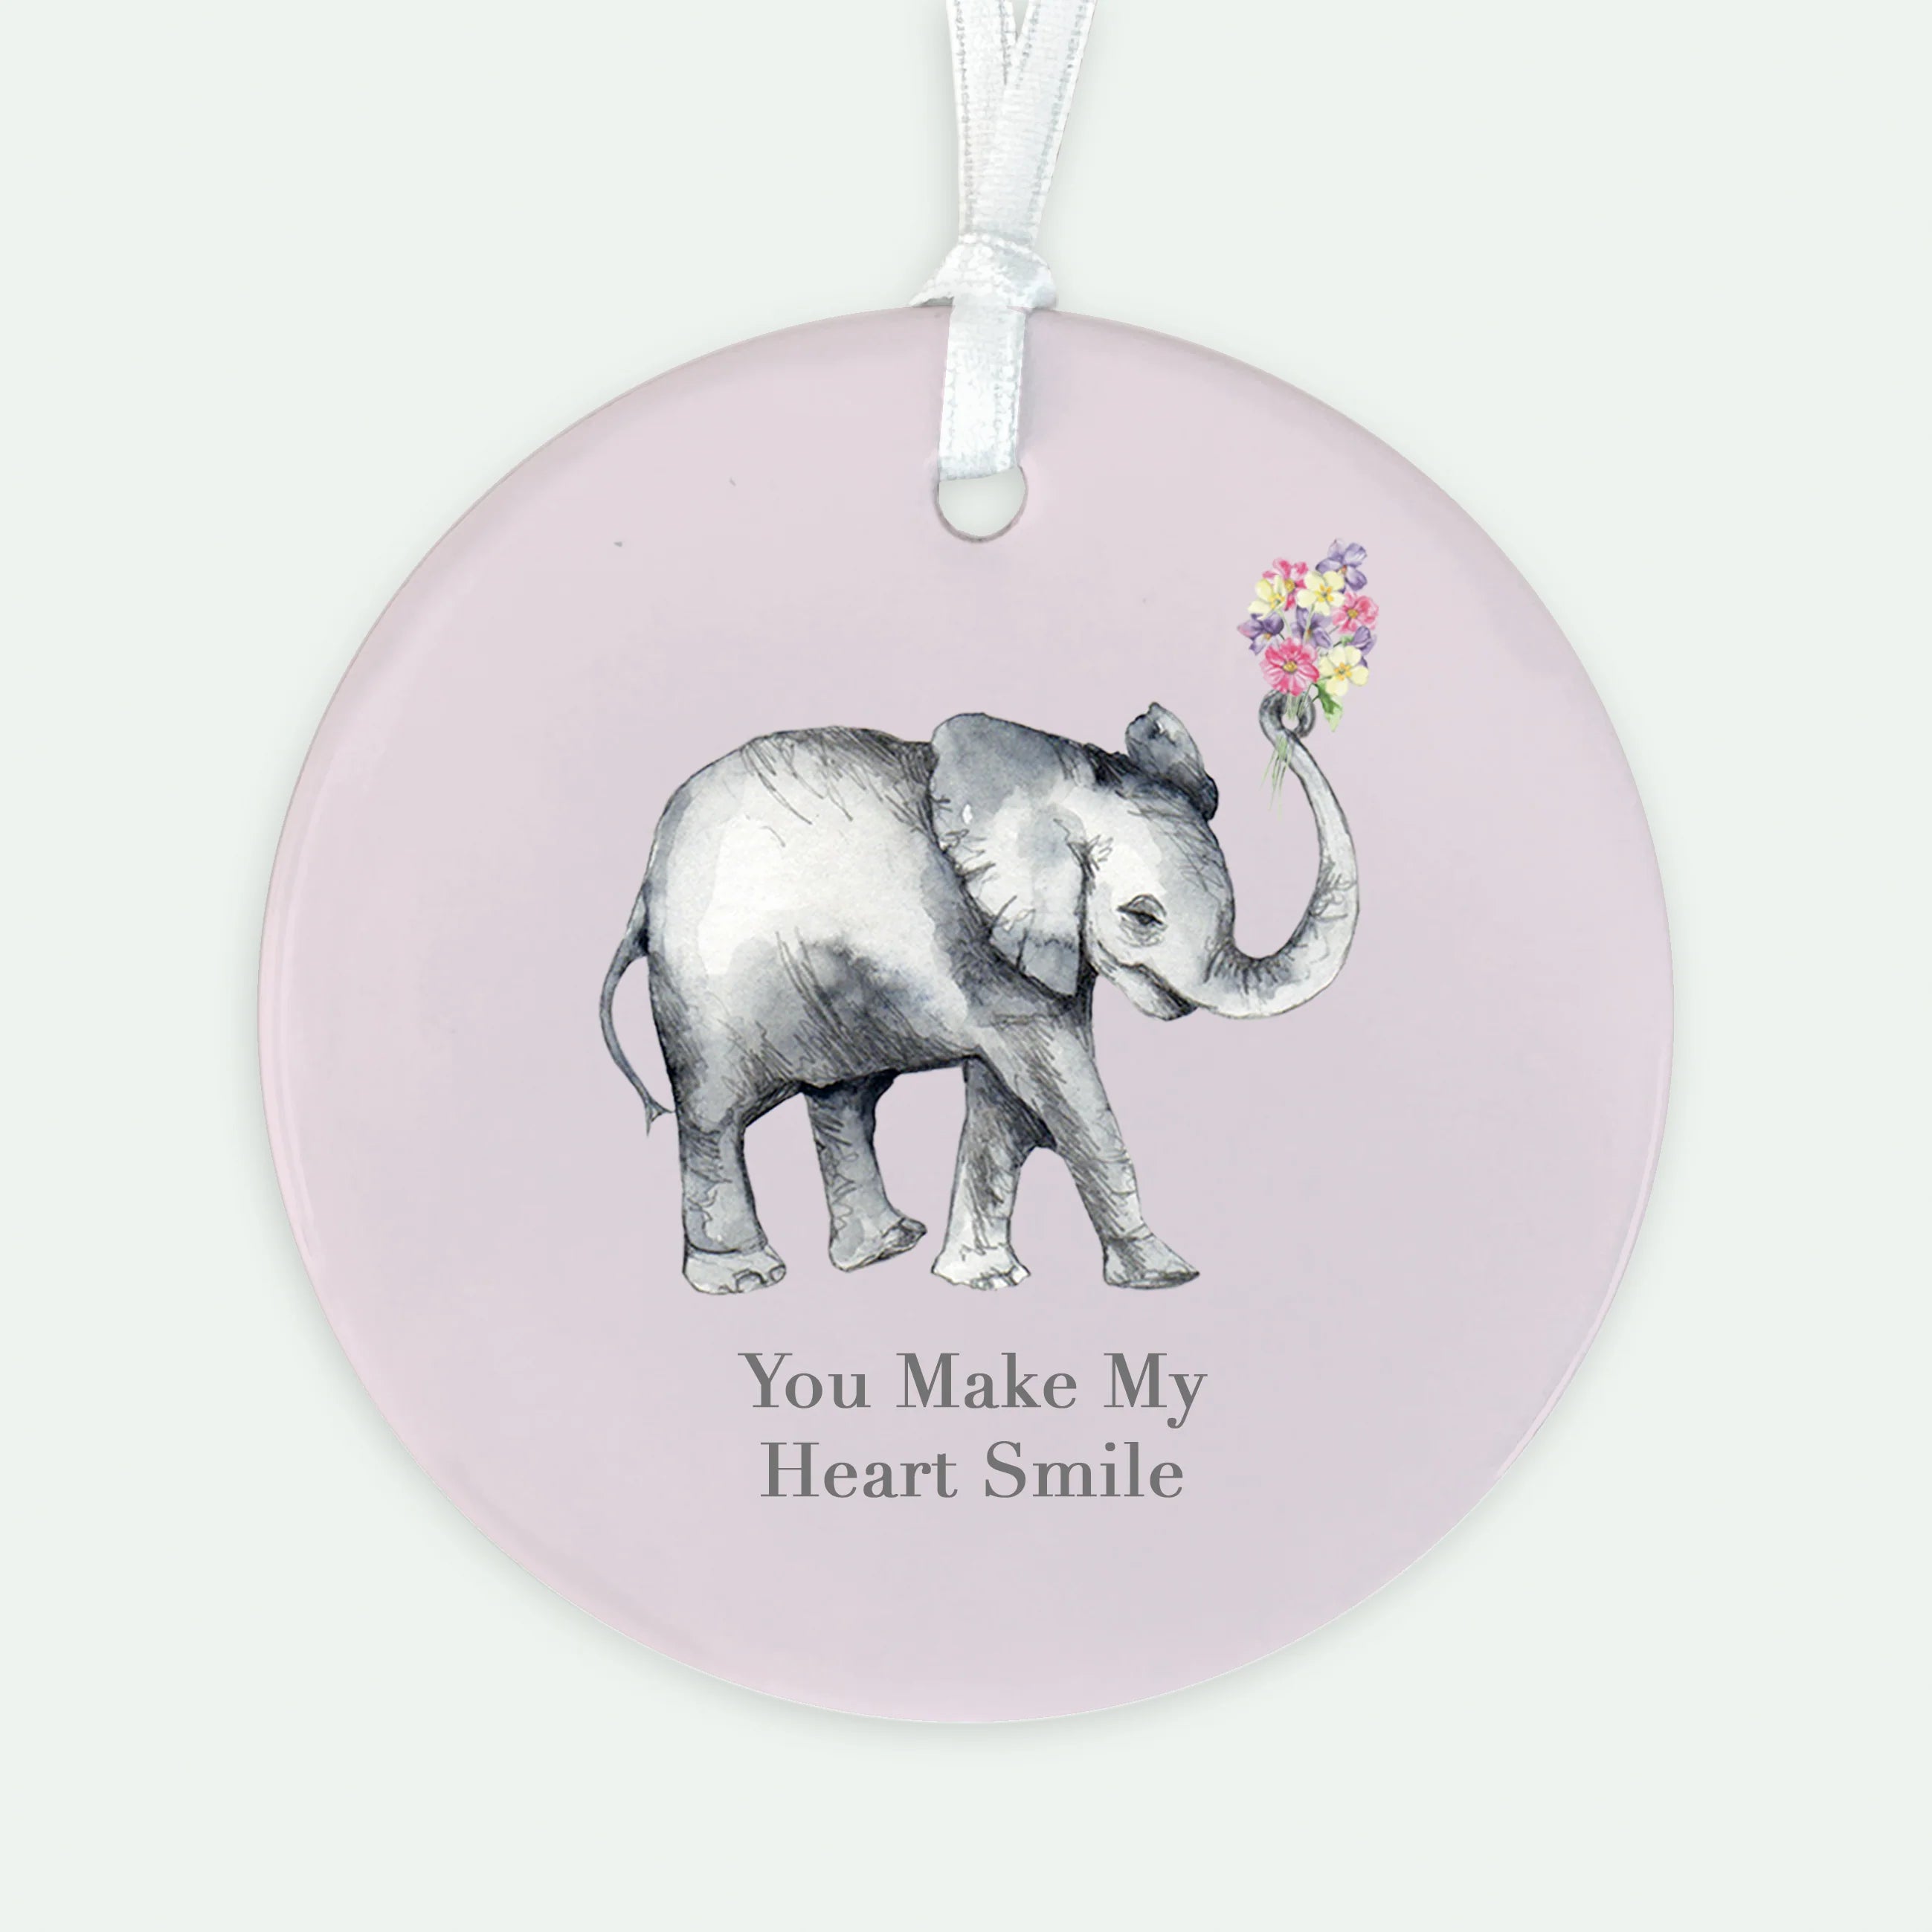 Fabulous Gifts Crumble & Core Keepsake Elephant Smile Card by Weirs of Baggot Street